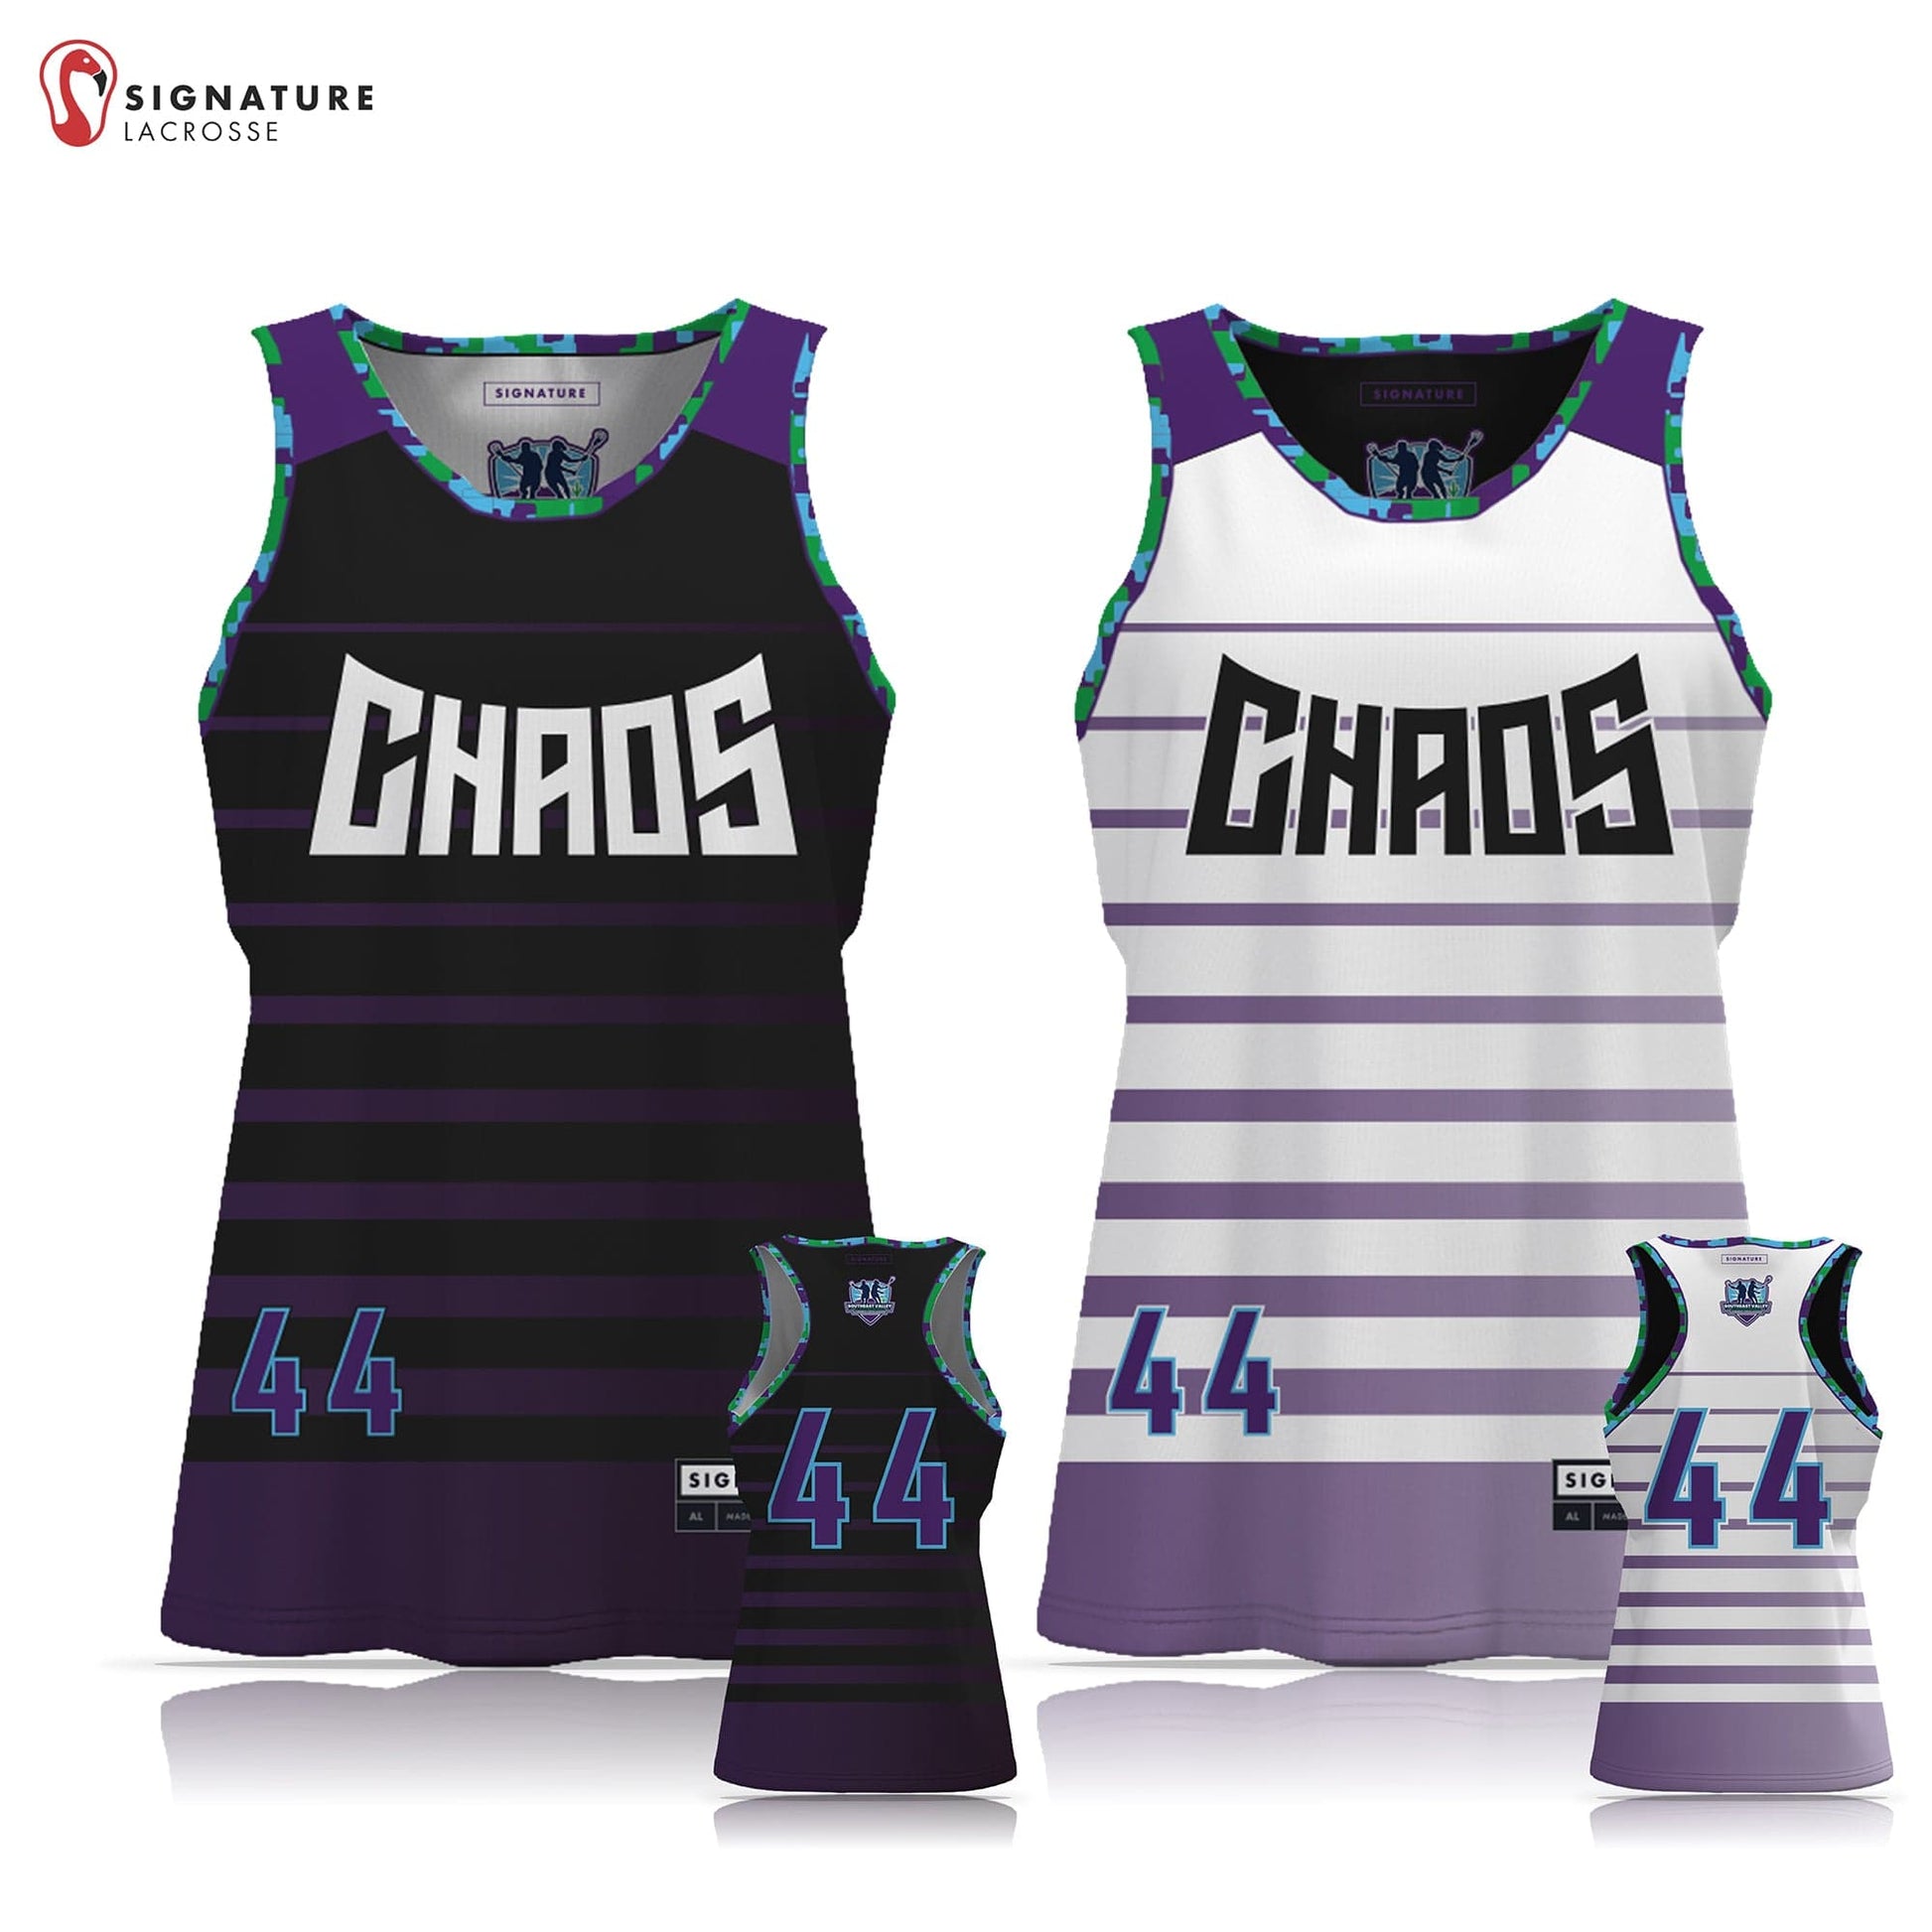 Southeast Valley Lacrosse Women's Player Reversible Game Pinnie: N/A Signature Lacrosse